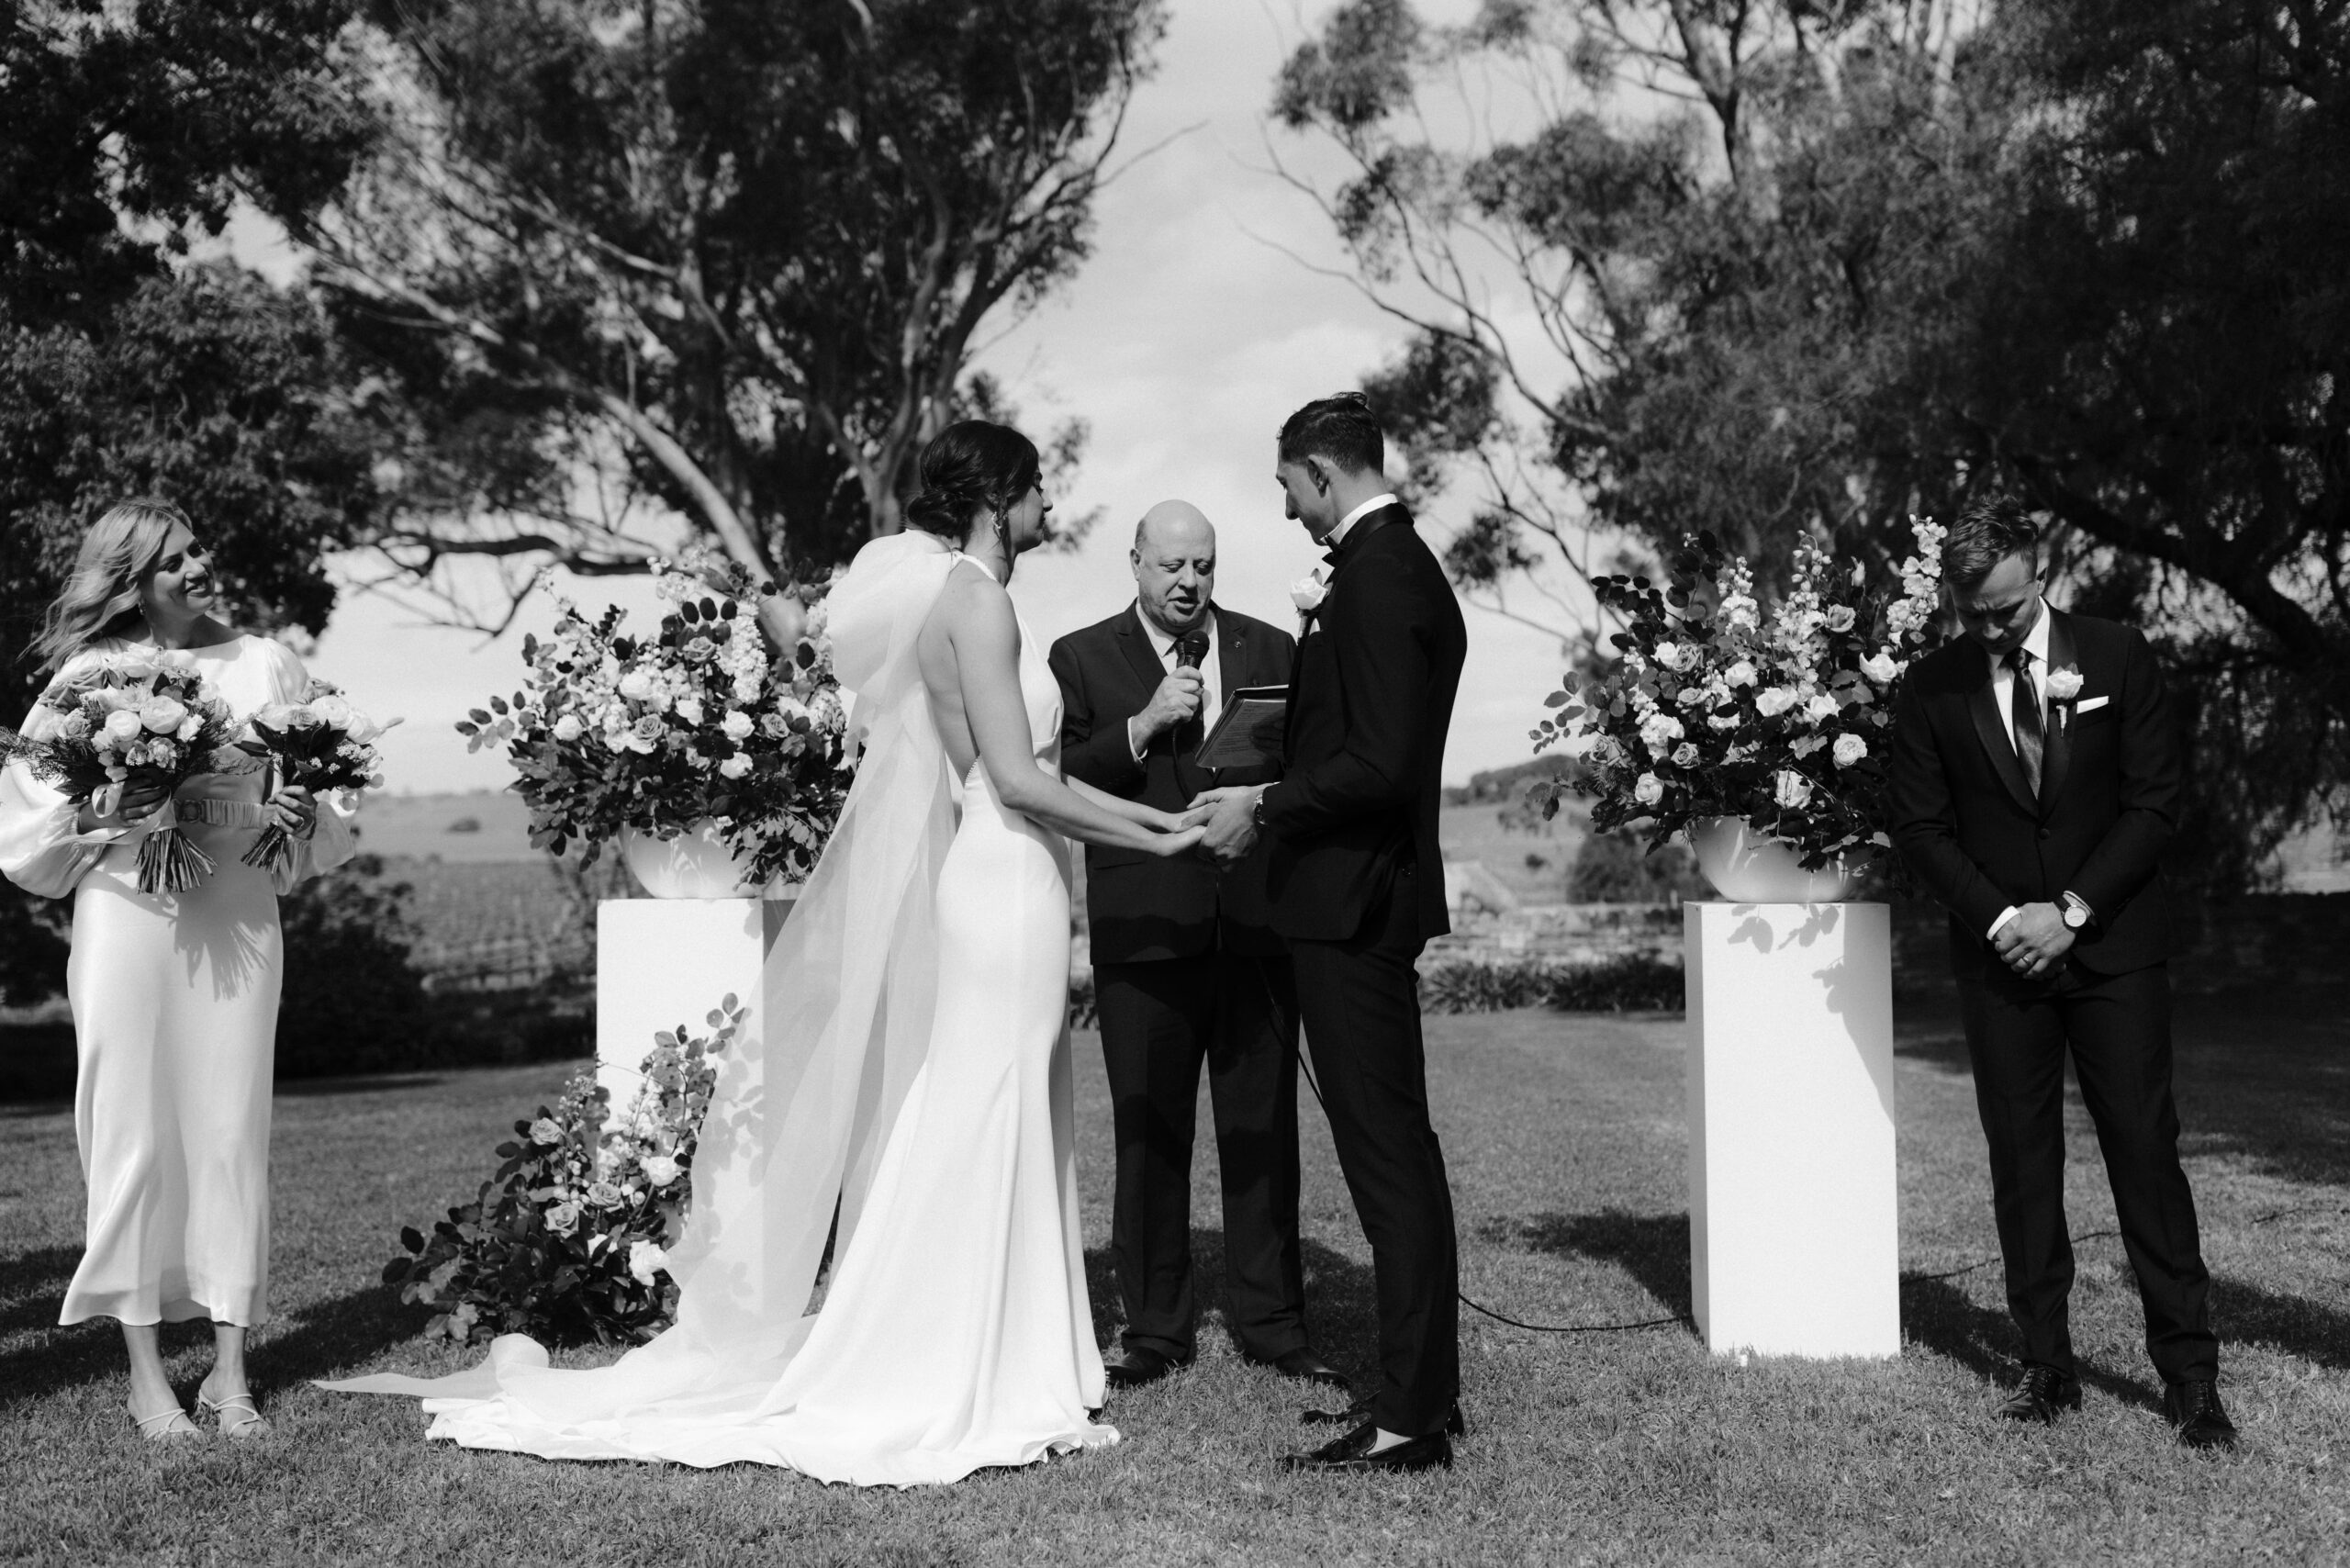 A black and white image of Olivia and Patrick standing hand in hand exchanging vows